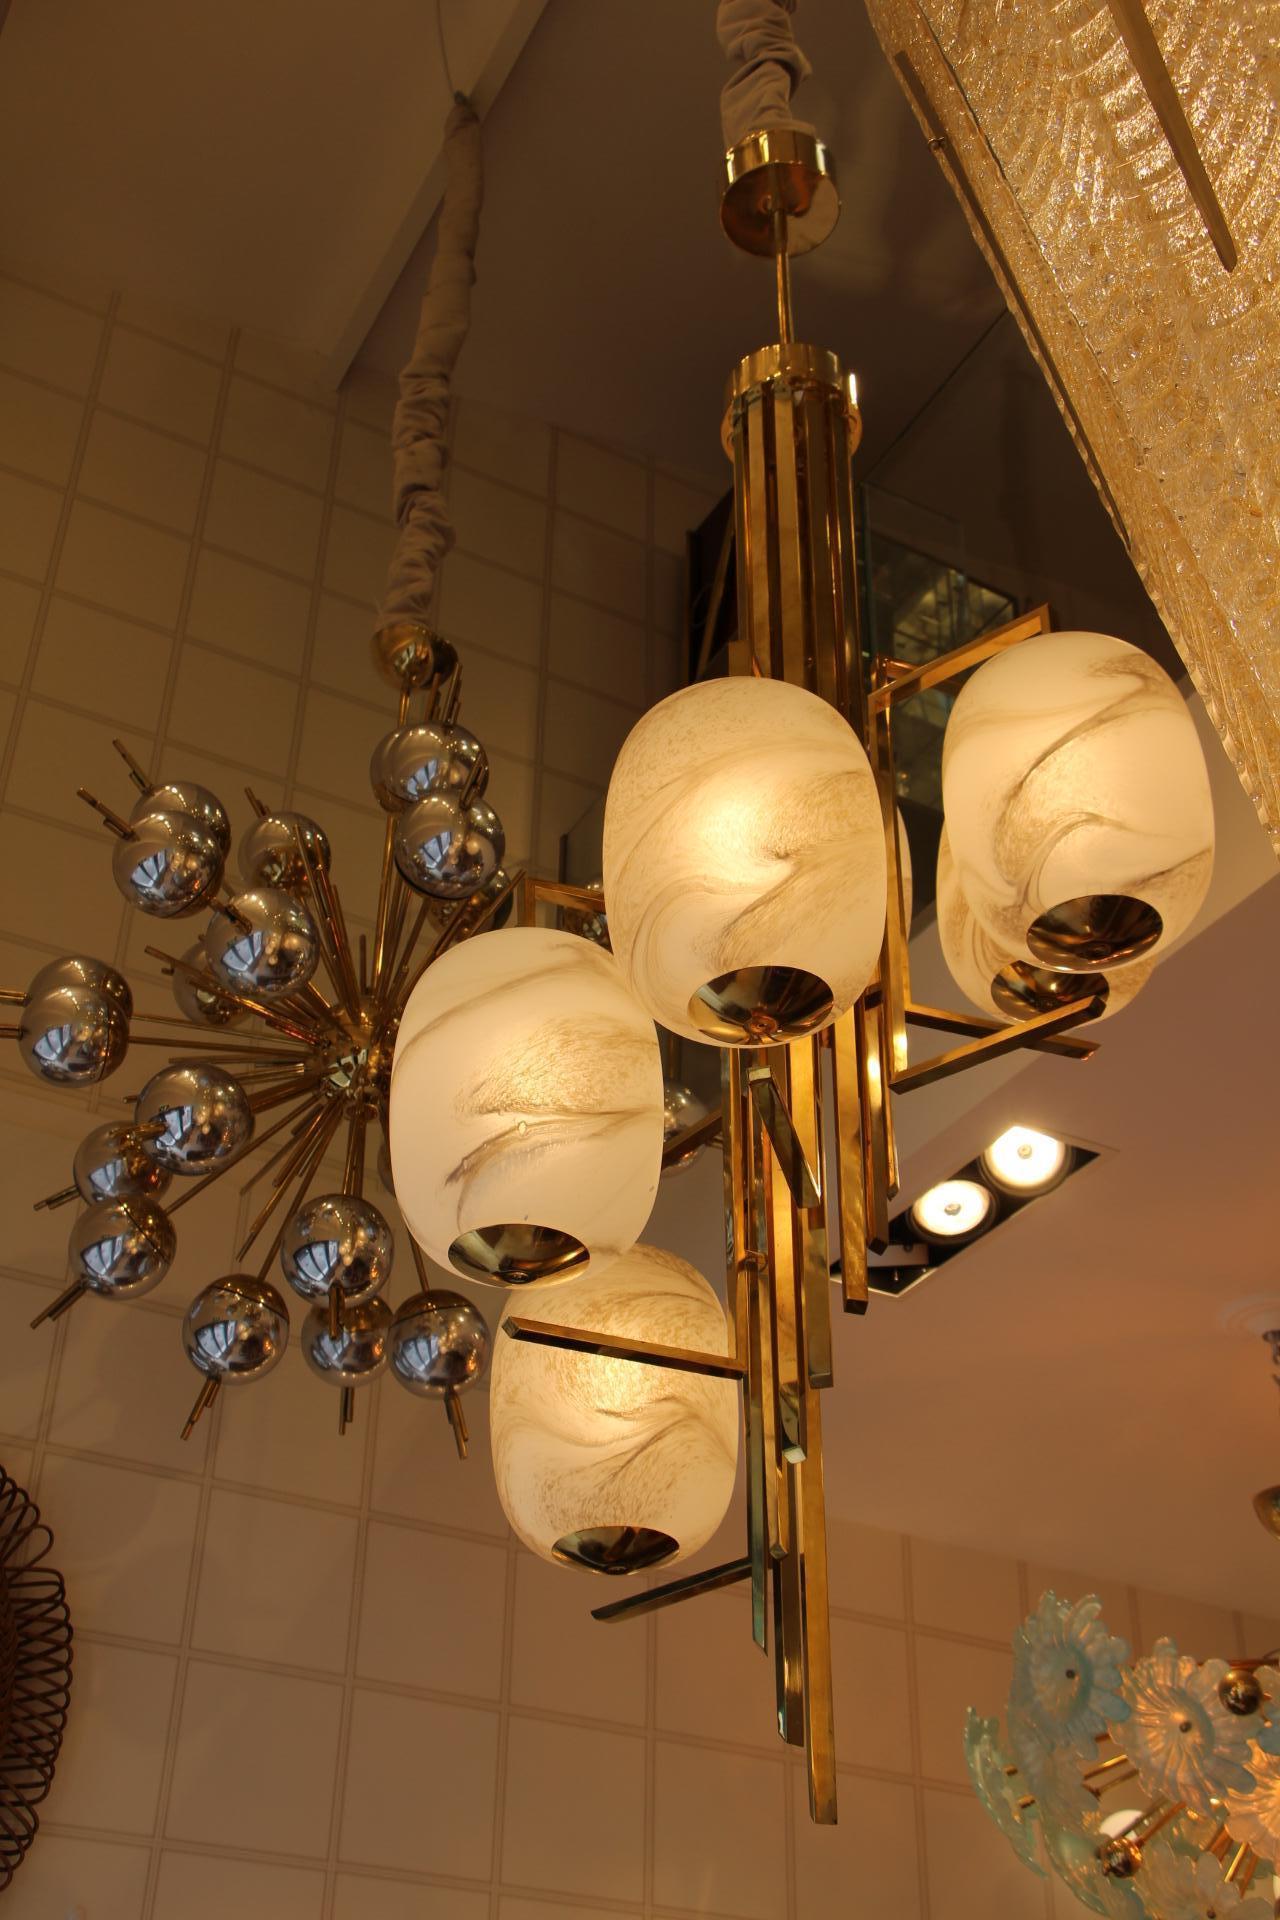 This spectacular chandelier features a main body made of several brass rods of different length and a series of 6 large globes in Murano glass looking like alabaster that turn and cascade like a spiral staircase.
It gives a warm and pleasant light